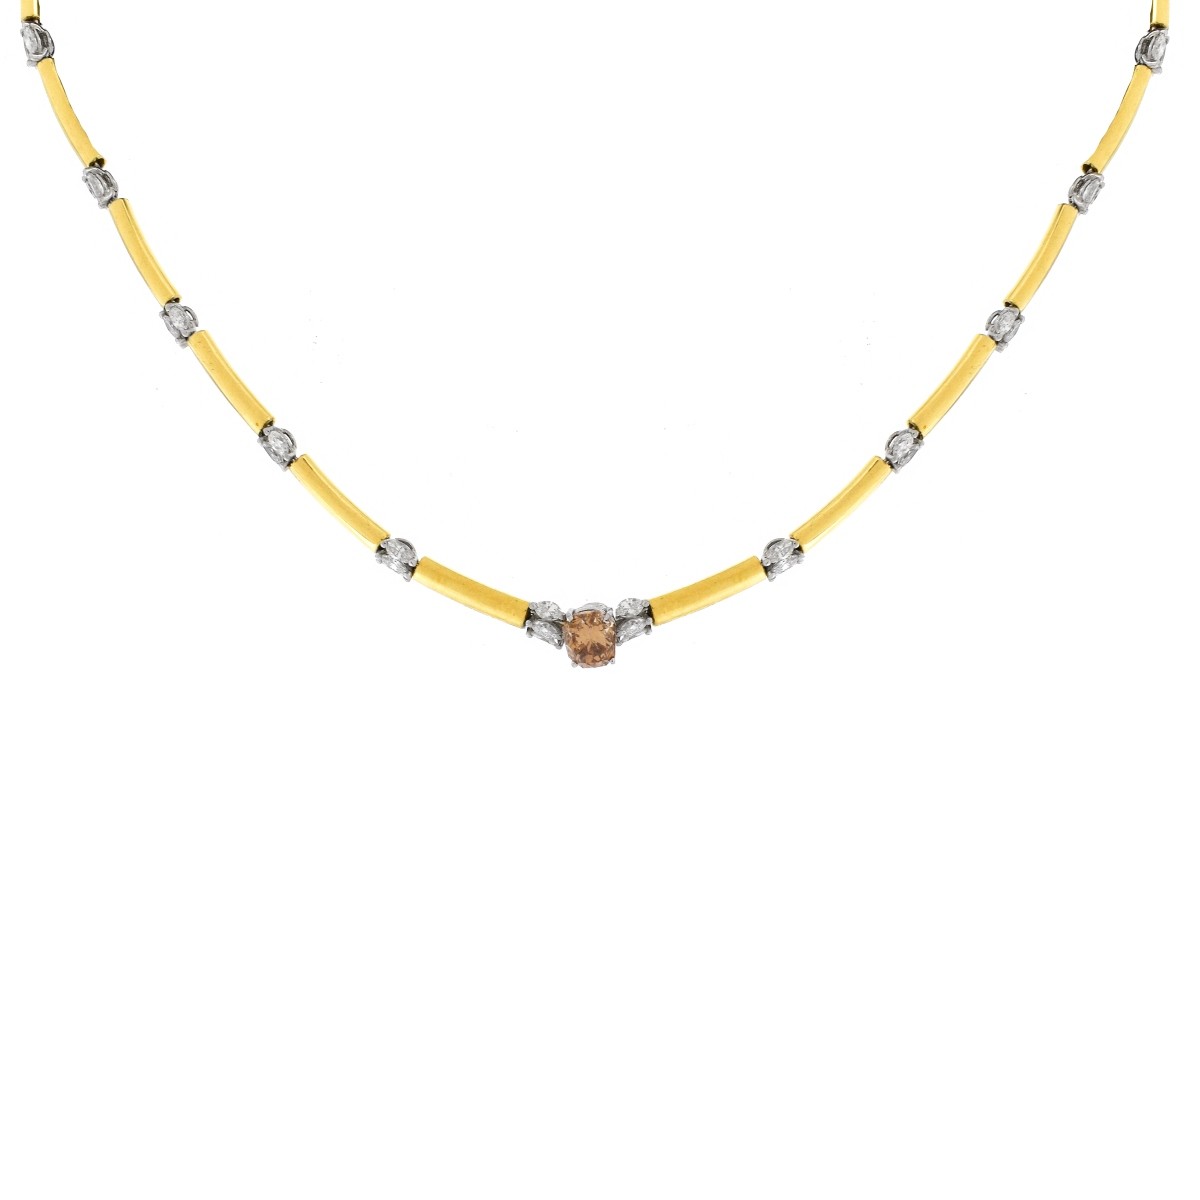 Fancy Amber Diamond and 18K Gold Necklace